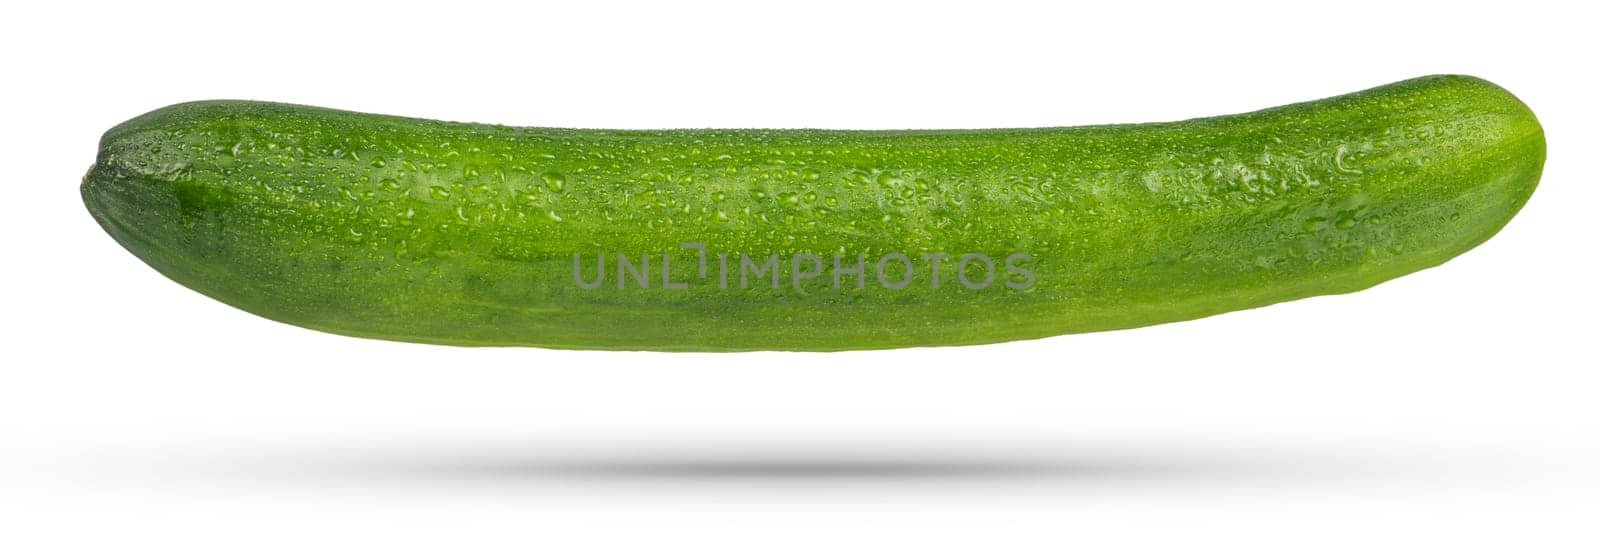 Flying vegetables. Whole green cucumber on a white isolated background. A cucumber hangs or falls casting a shadow on a white background. High quality photo